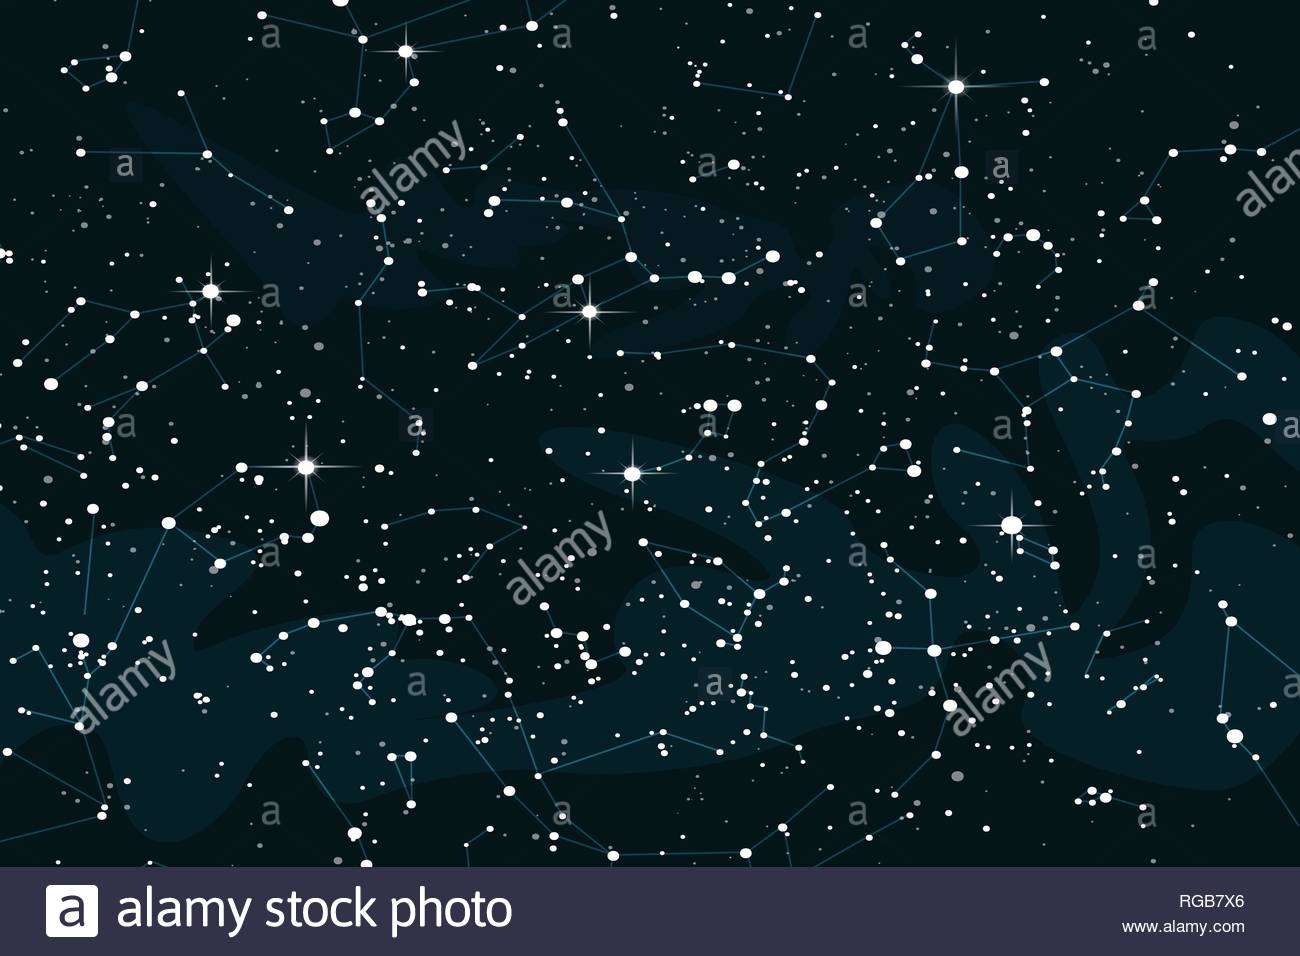 Cartoon Space Background With Bright Stars Night Starry Sky